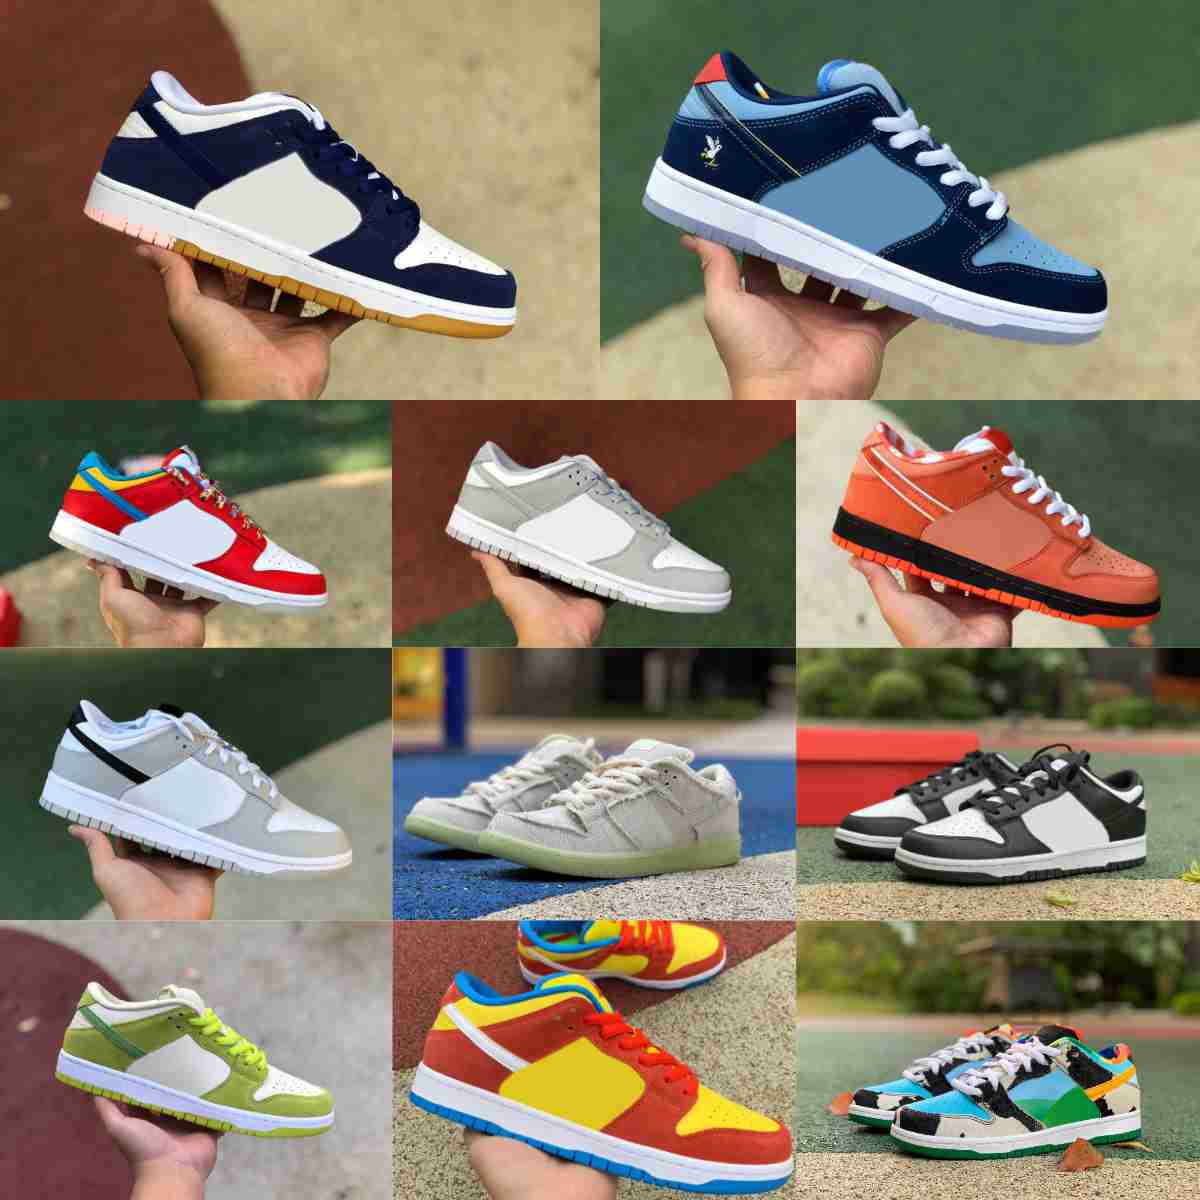 

Trainers DUNKES Men Women Running Shoes SB White Black Orange Lobster Mummy Why So Sad Pack Grey Fog Fruity Pebbles LA Dodgers Outdoor Bart Simpson Sports Sneakers S8, Please contact us